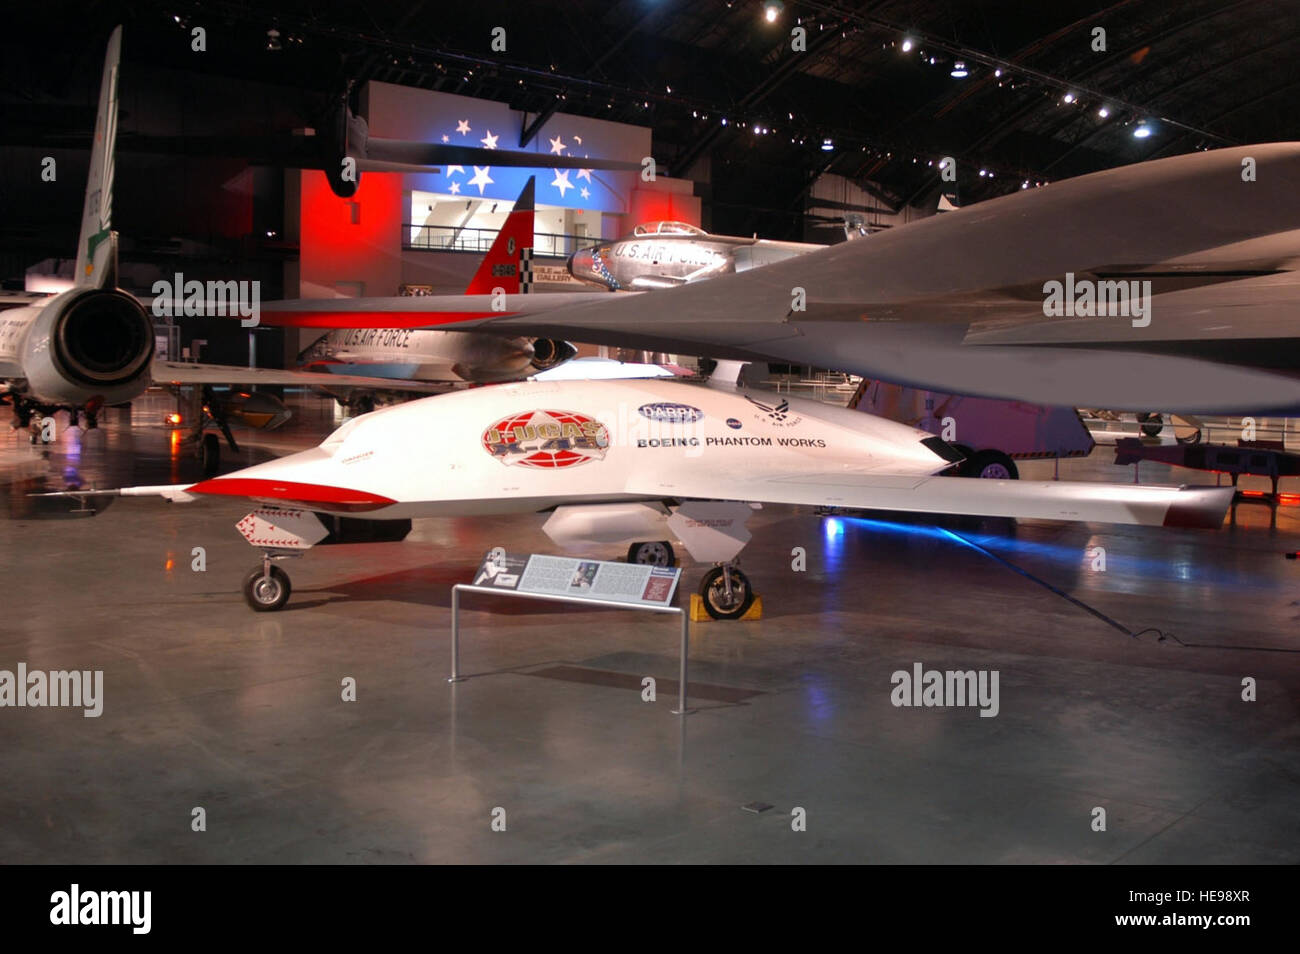 DAYTON, Ohio - Boeing X-45A J-UCAS on display in the Cold War Gallery at the National Museum of the U.S. Air Force. (U.S. Air Force photo) Stock Photo